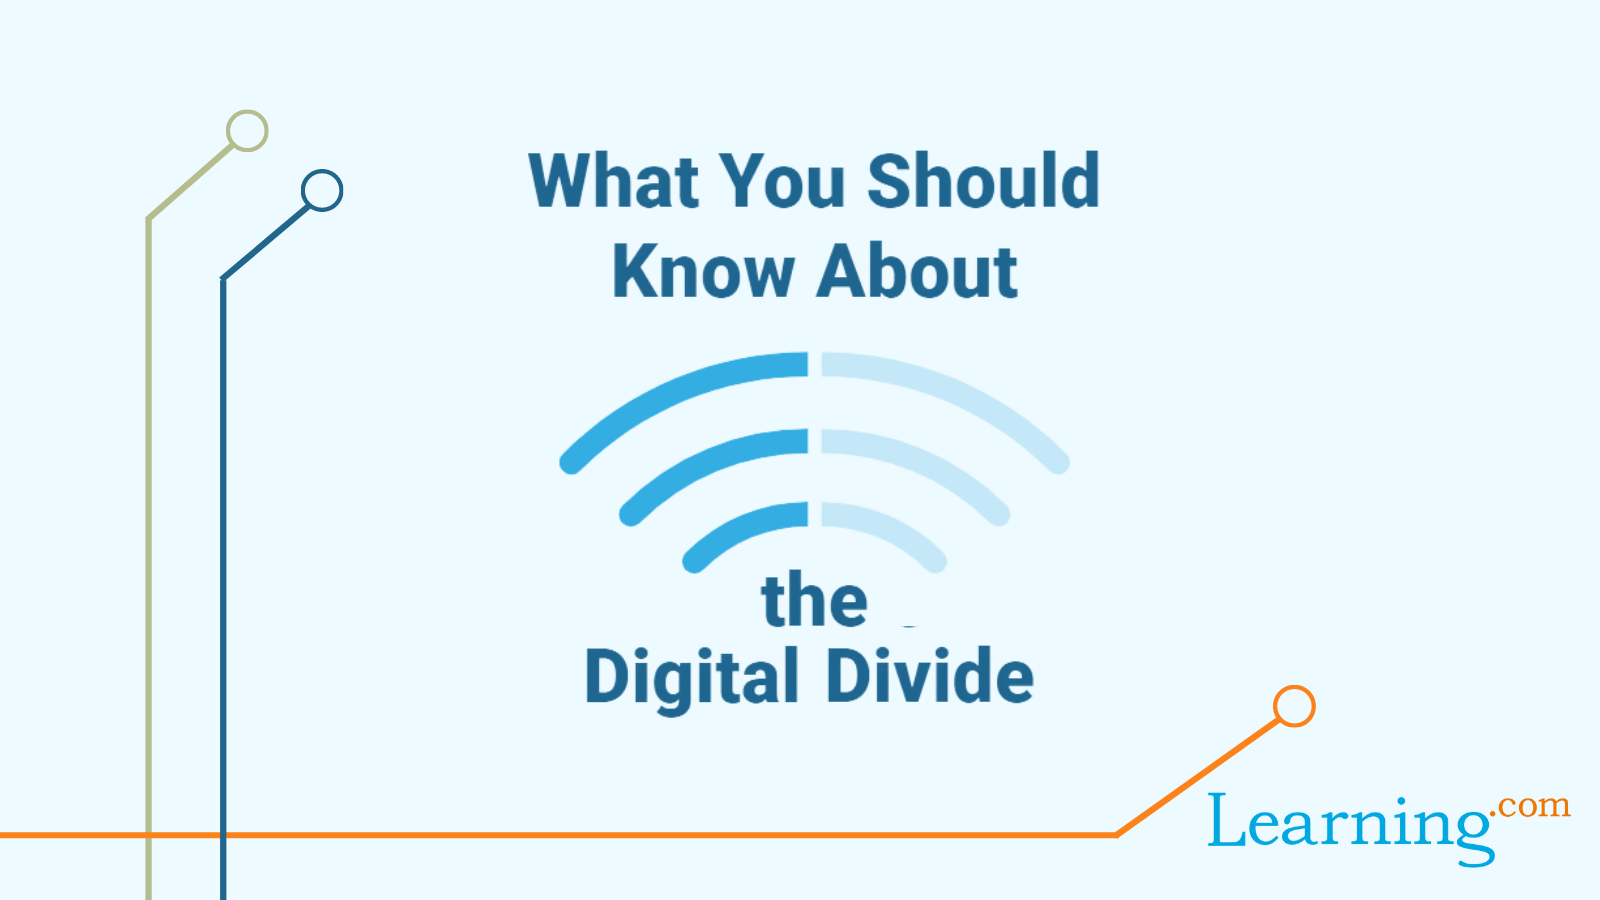 thesis about digital divide